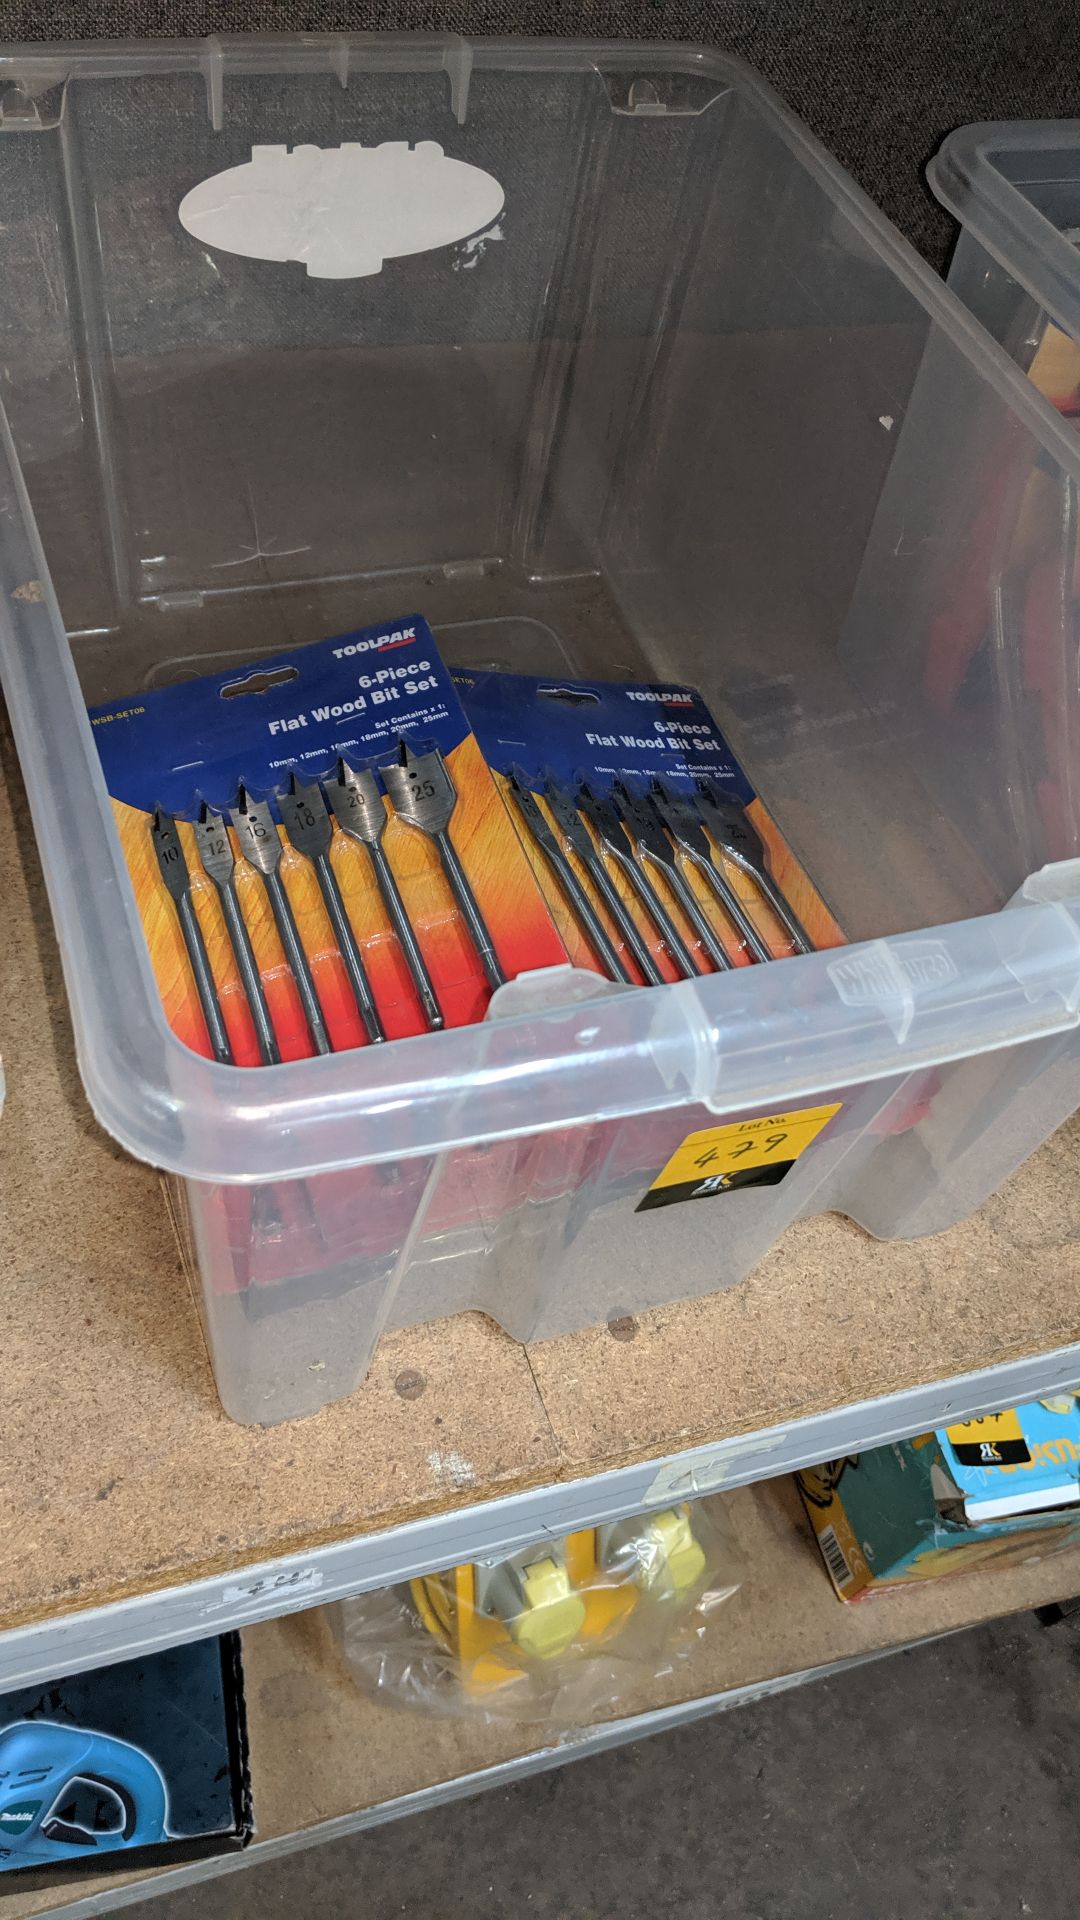 10 off Toolpak 6-piece flat wood bit sets This is one of a number of lots from Rochdale Re-Tool